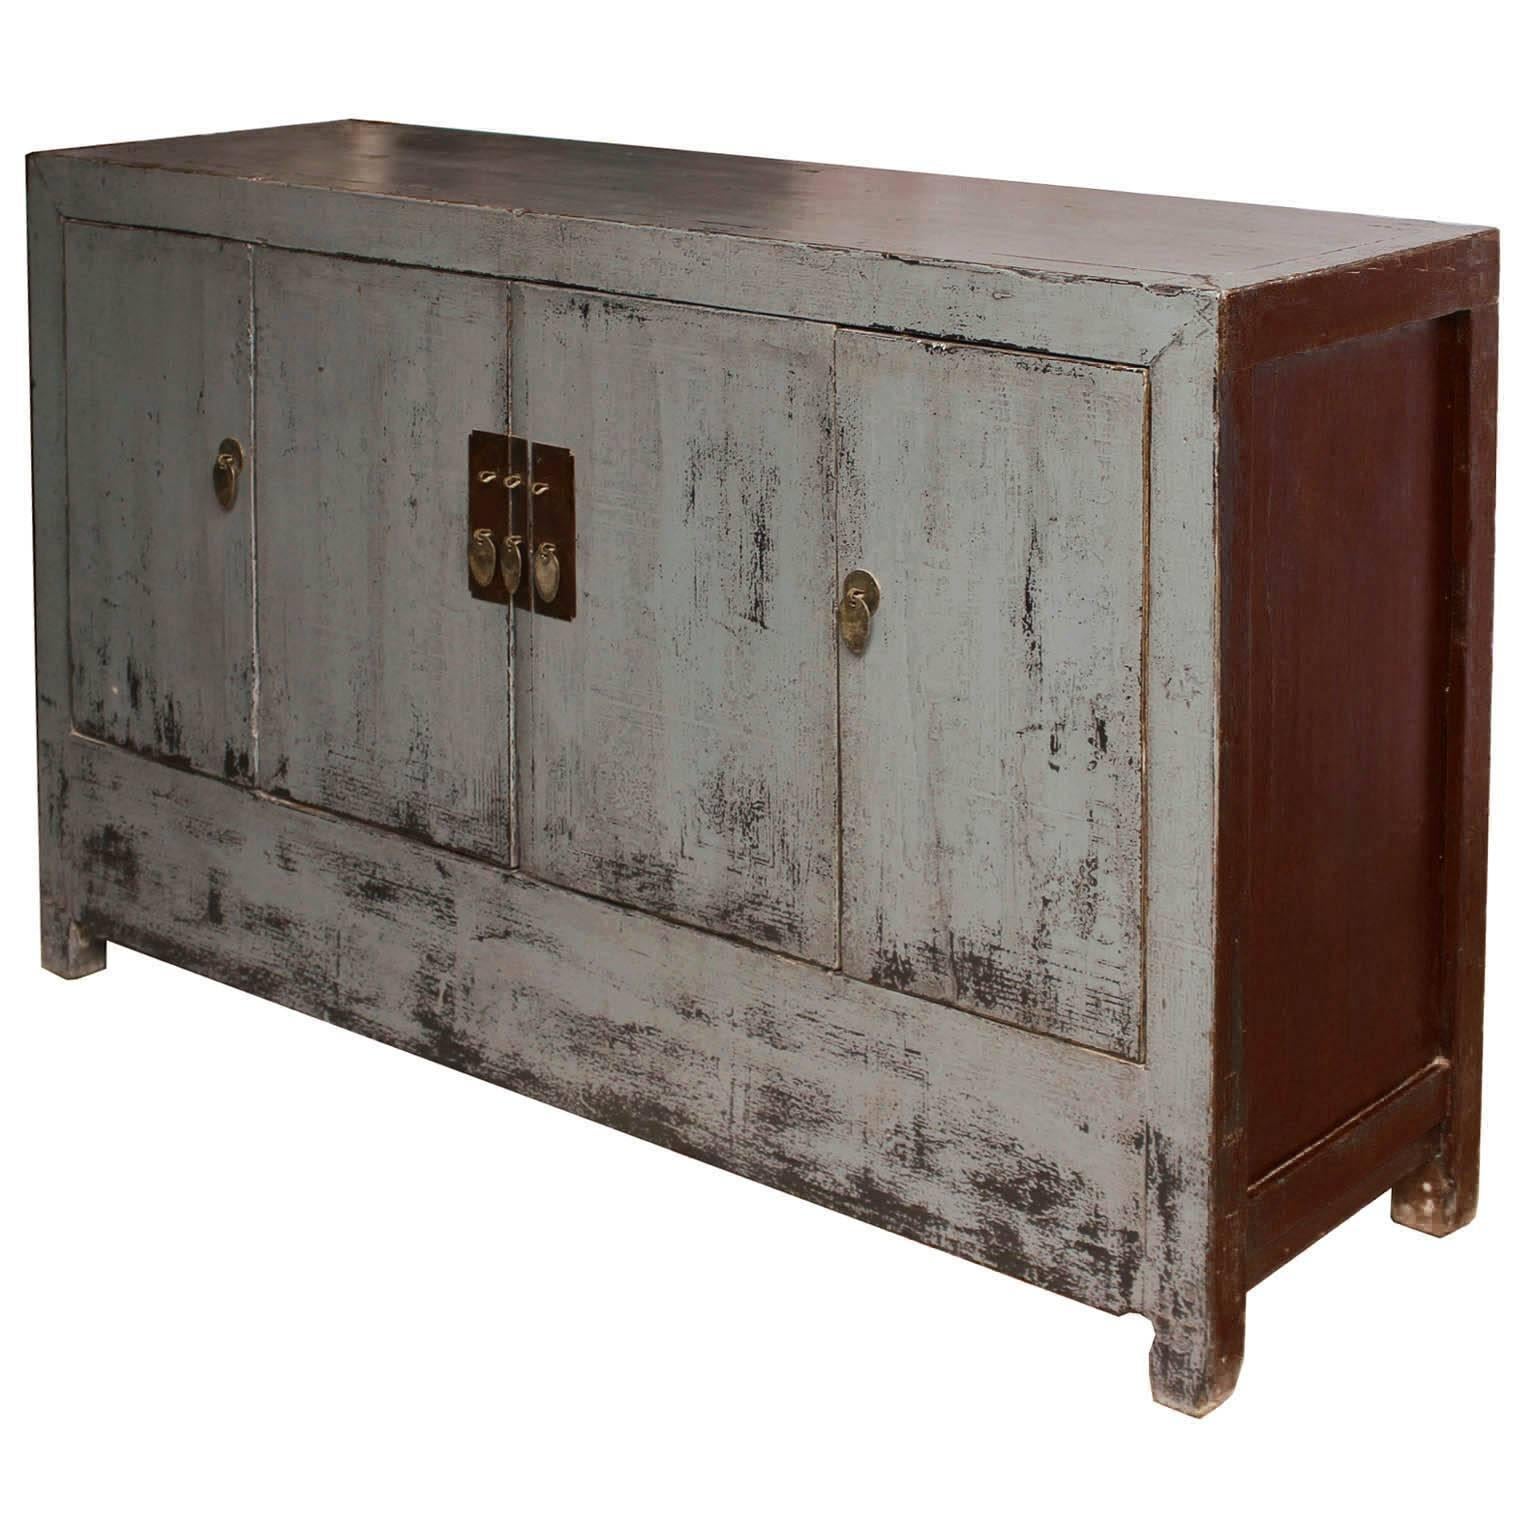 Four-door gray lacquer sideboard has a contemporary look with clean lines and straight edges. Use as a sideboard in the living or dining room with lamps and accessories on top. New interior shelf and hardware. Dongbei, China, circa 1900s.